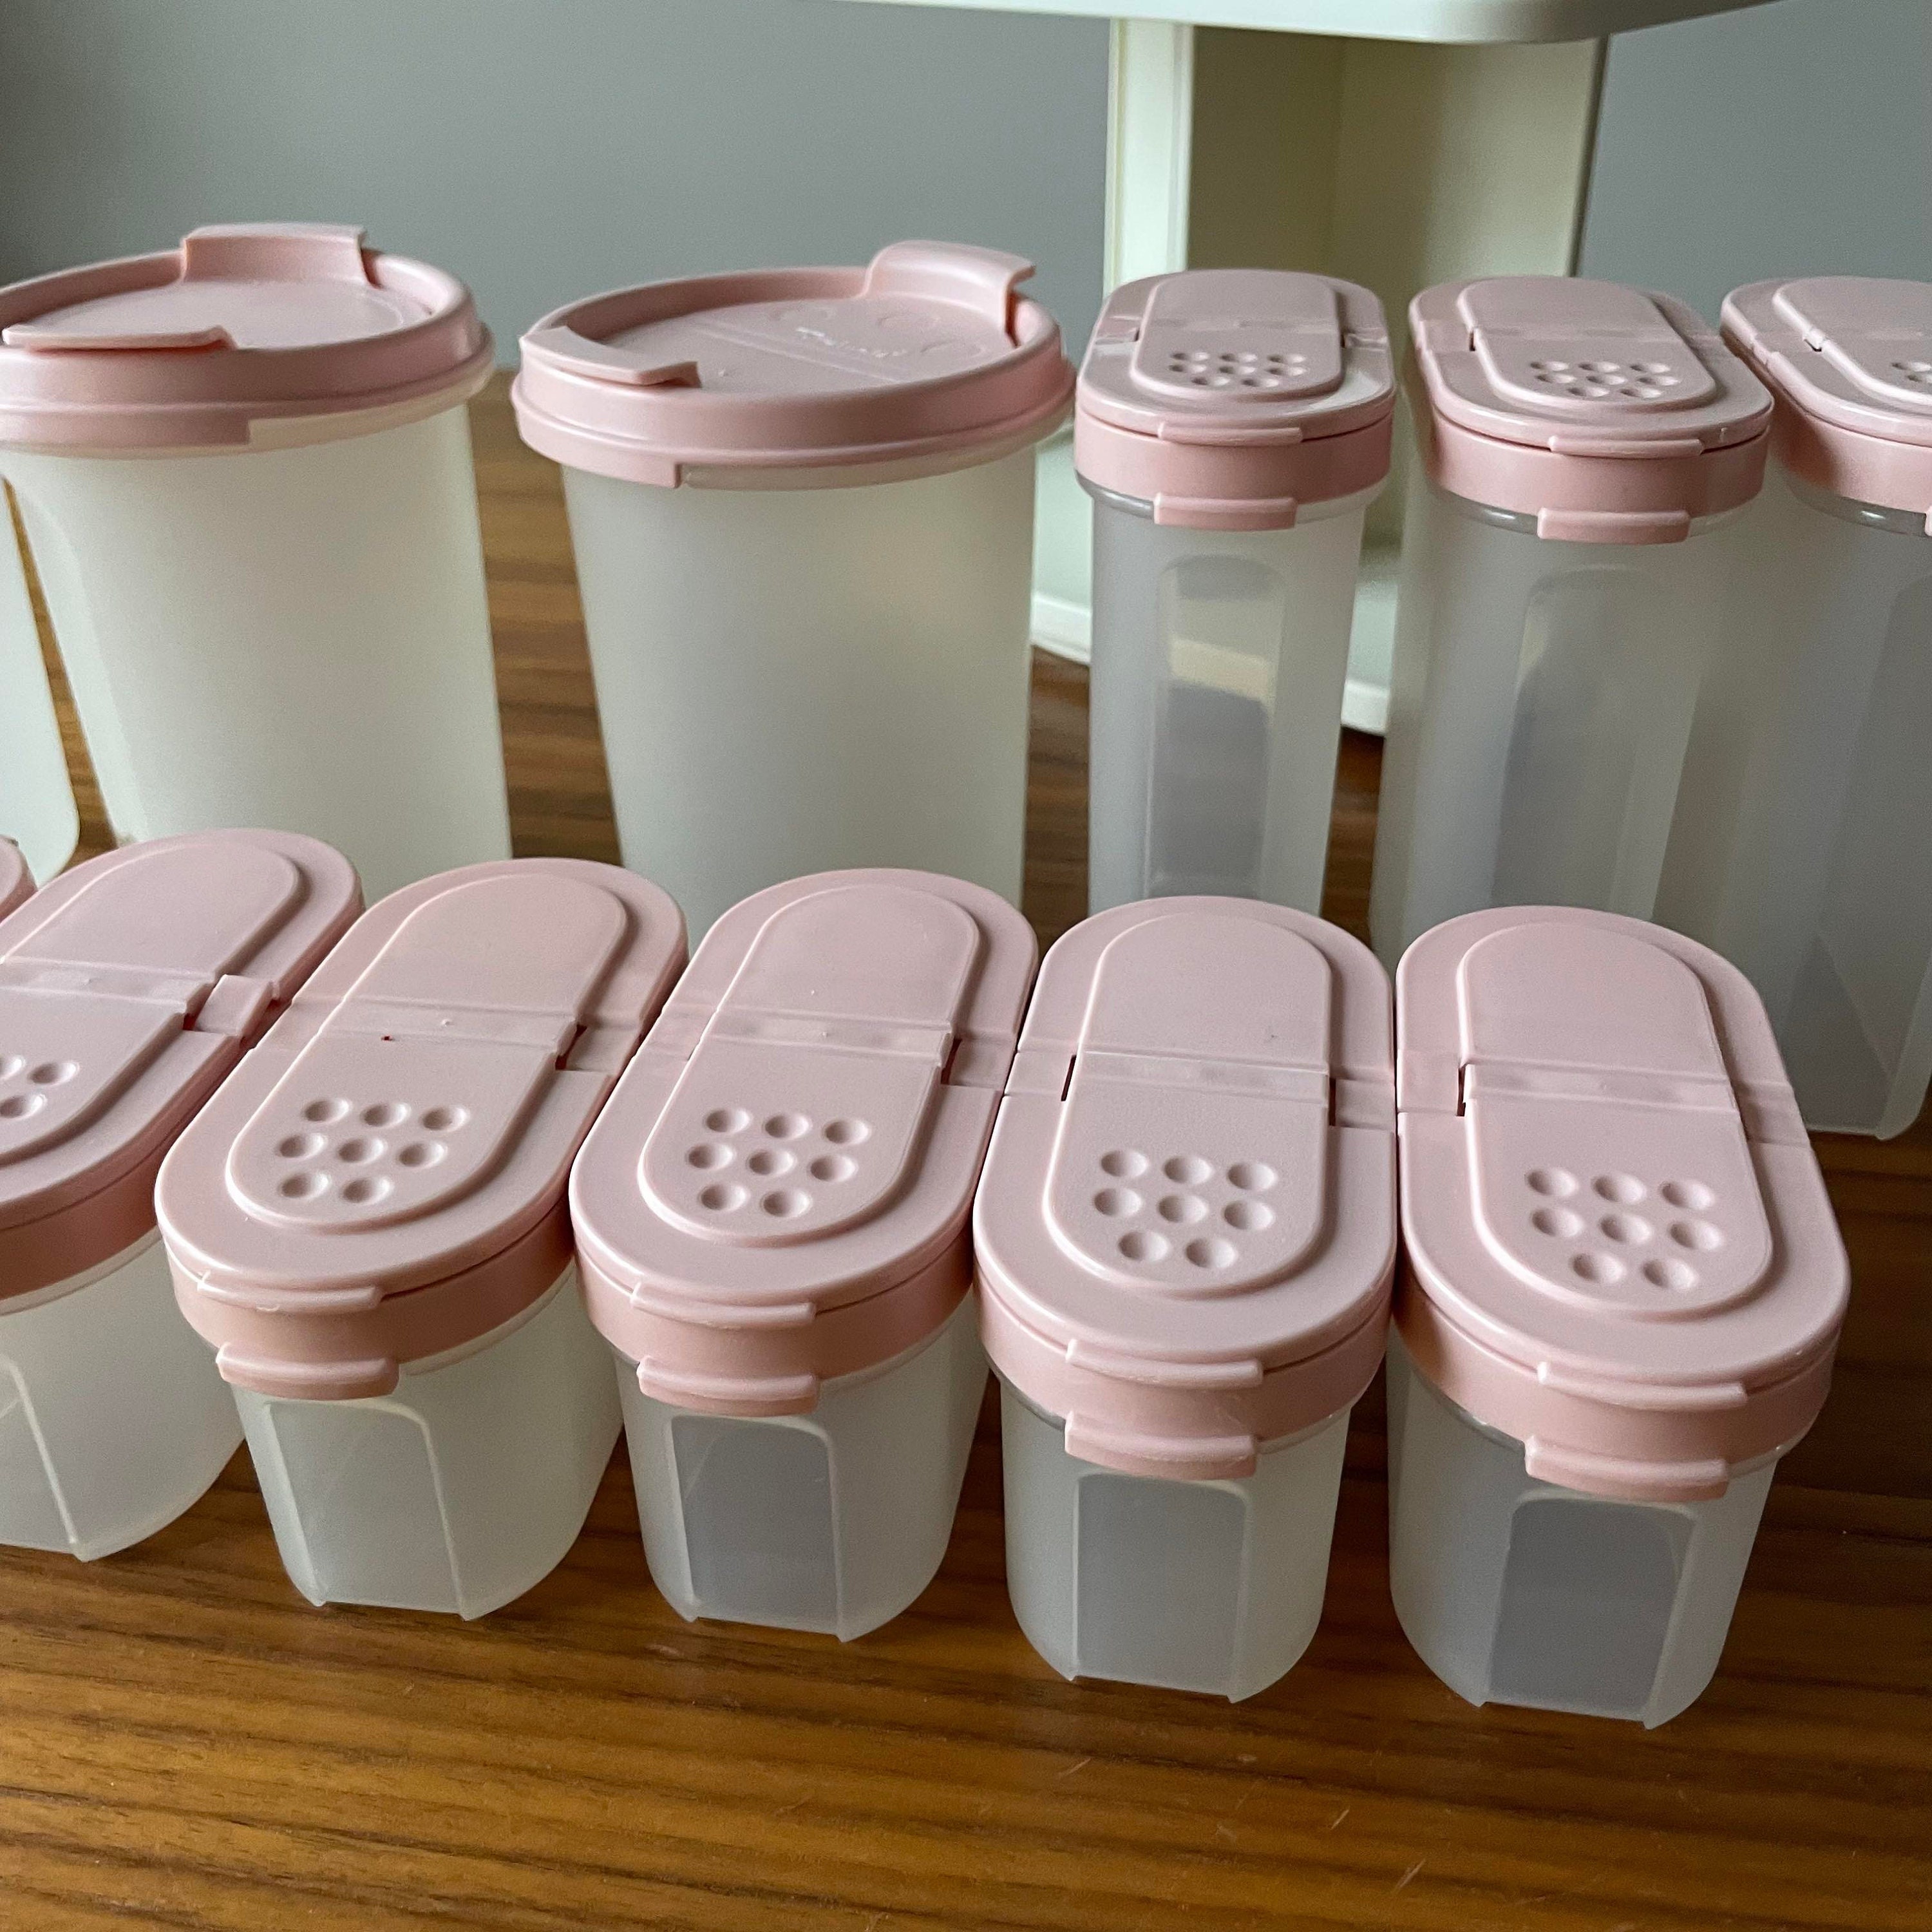 Tupperware Modular Mates Spice Shakers Set in Strawberry Cream With  Carousel / Vintage Tupperware Pink Spice Containers With Lazy Susan 